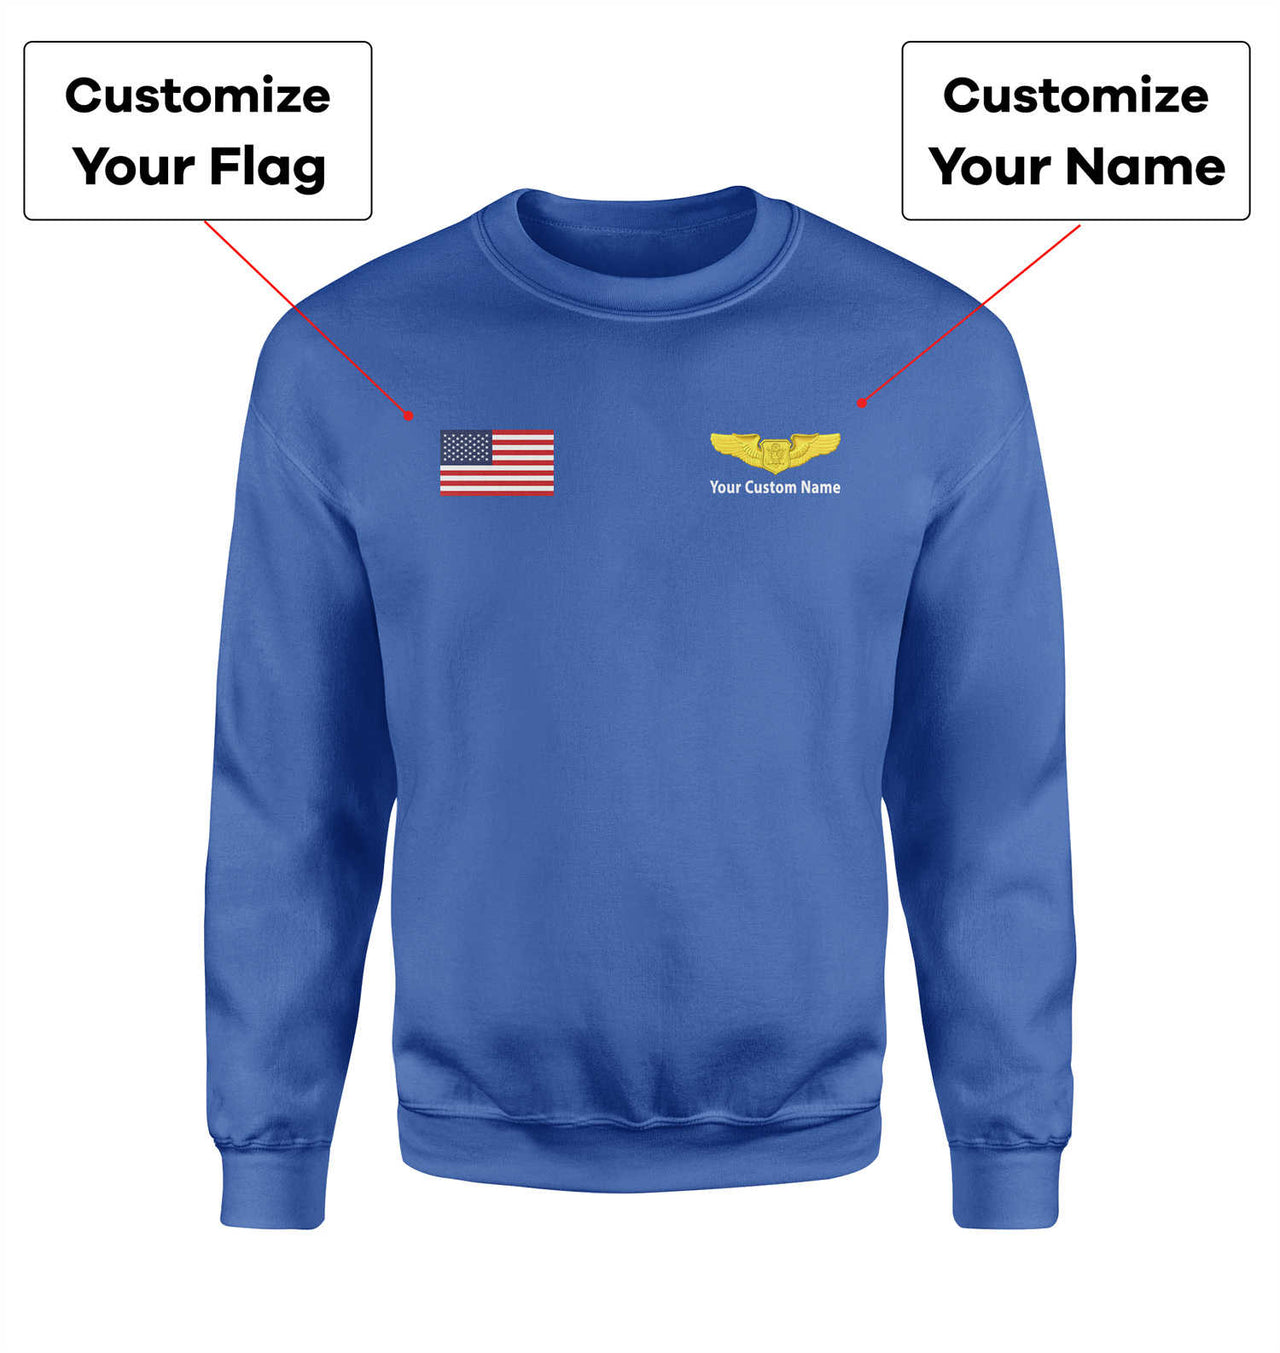 Custom Flag & Name with (Special US Air Force) Designed 3D Sweatshirts